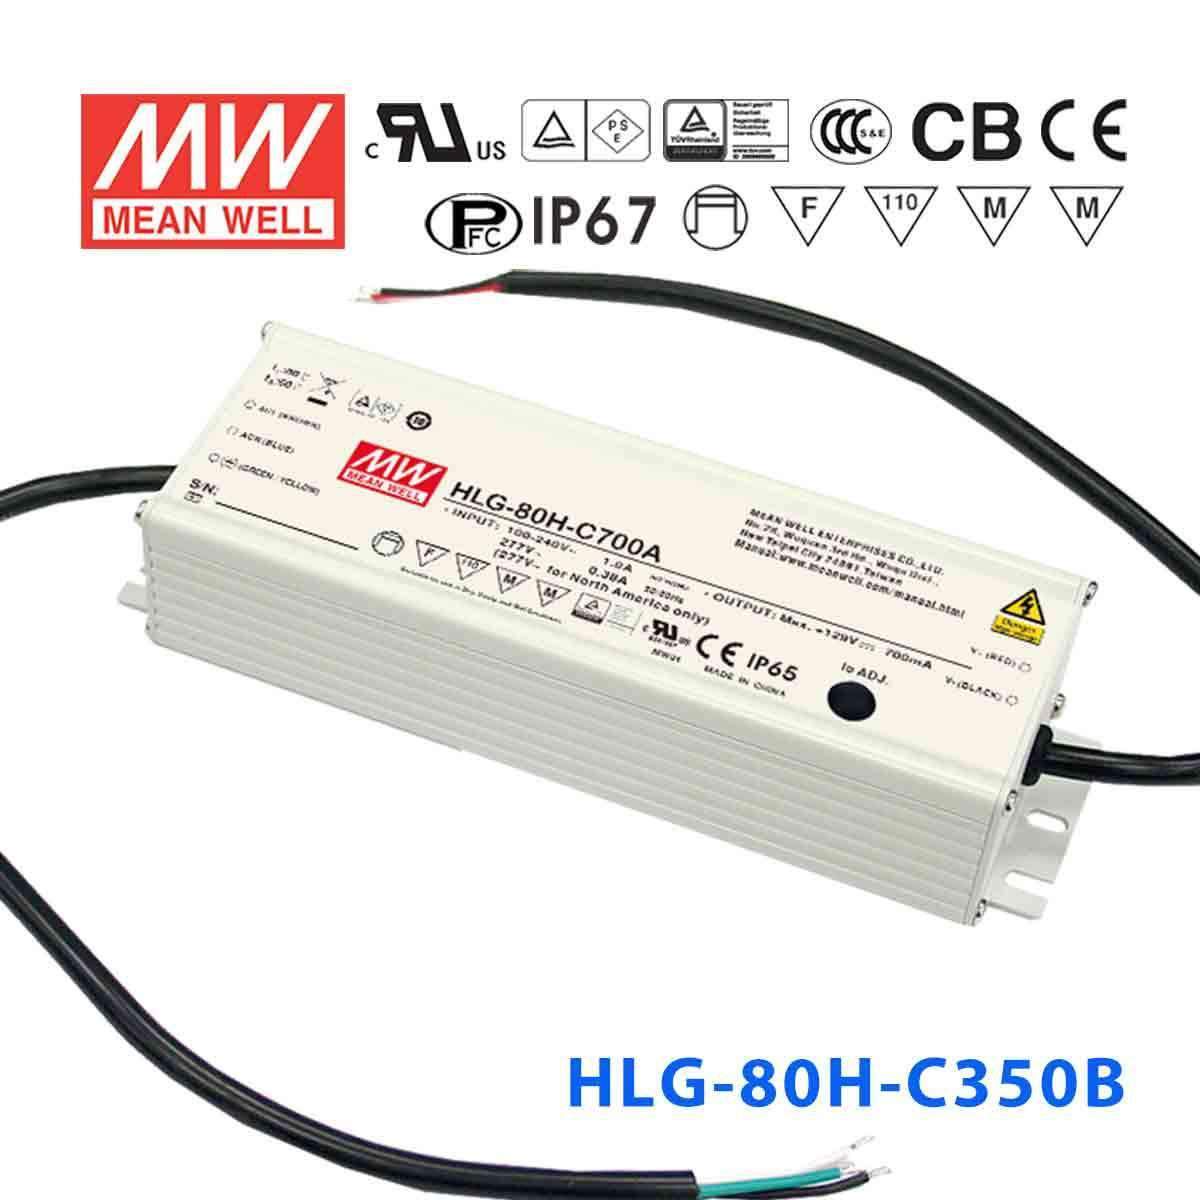 Mean Well HLG-80H-C350B Power Supply 89.95W 350mA - Dimmable